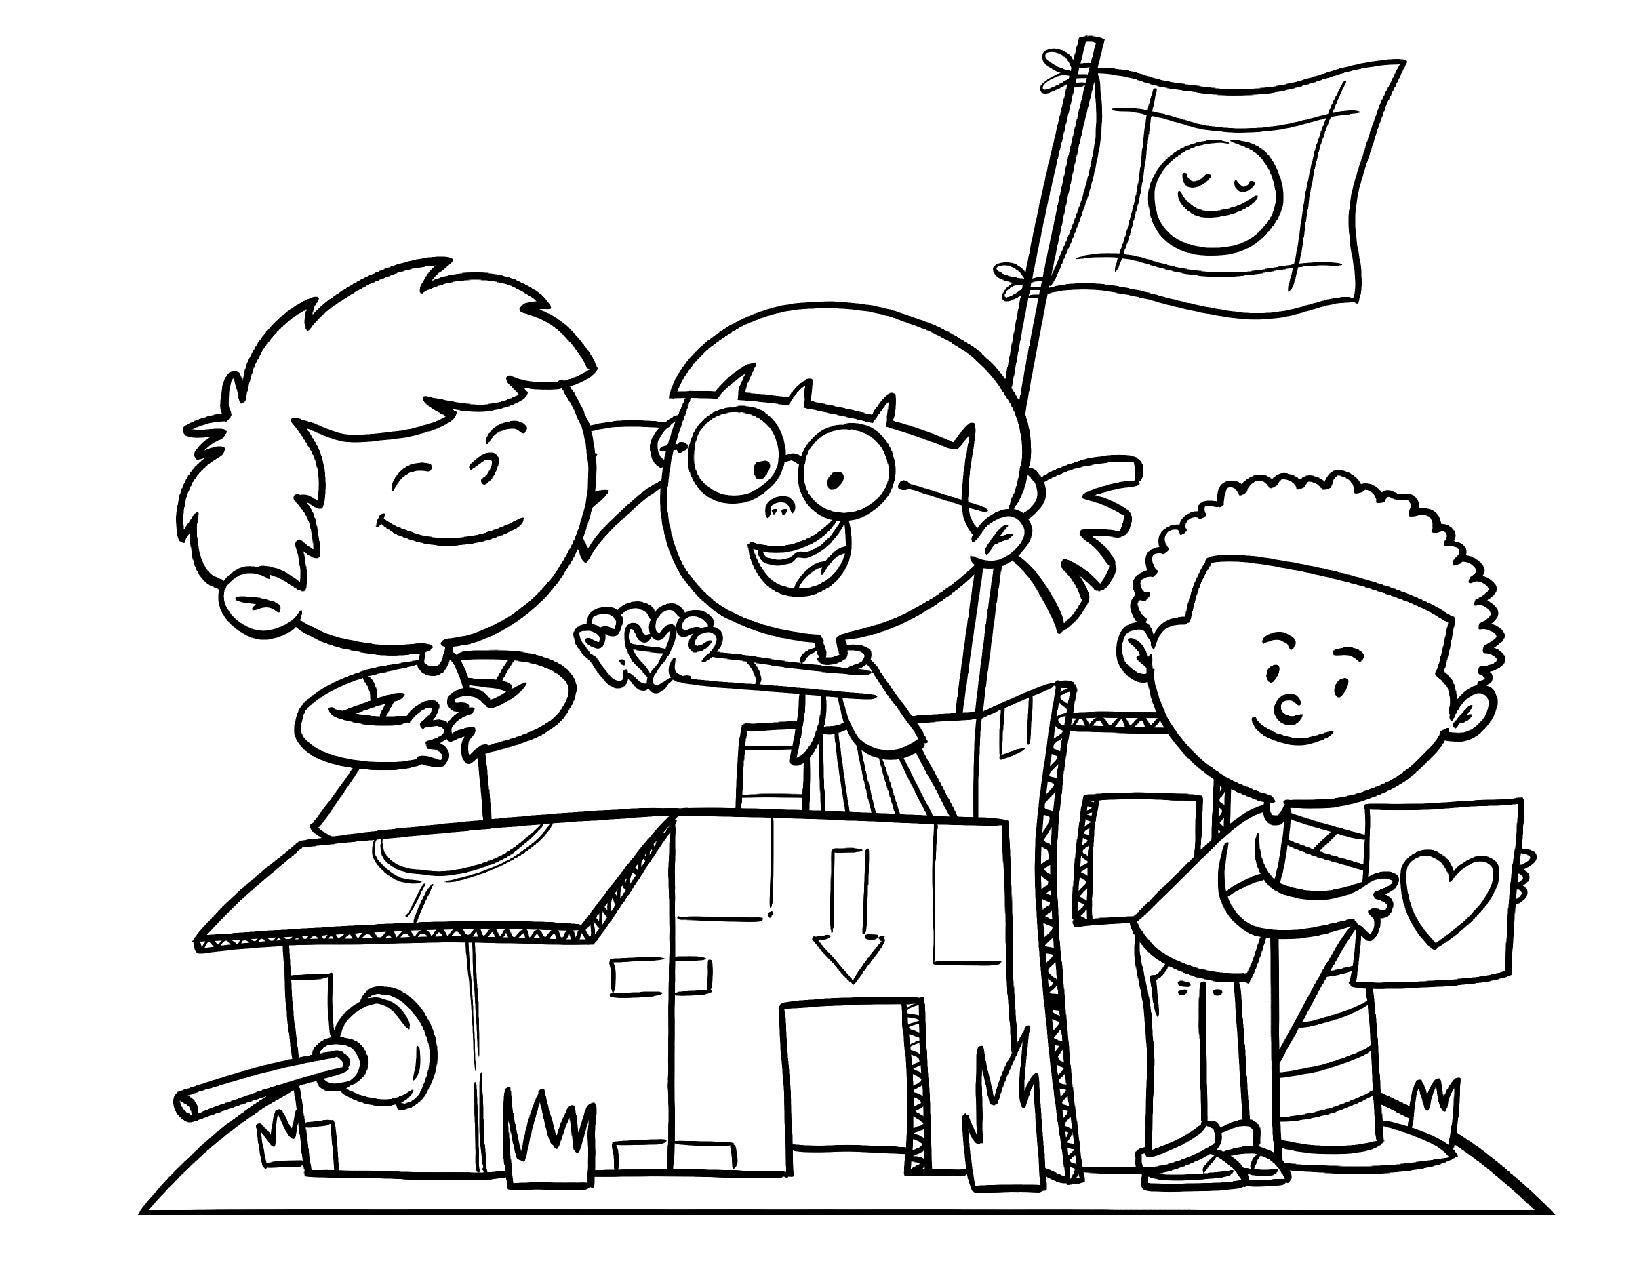 Coloring Page of kids playing in a cardboard box fort